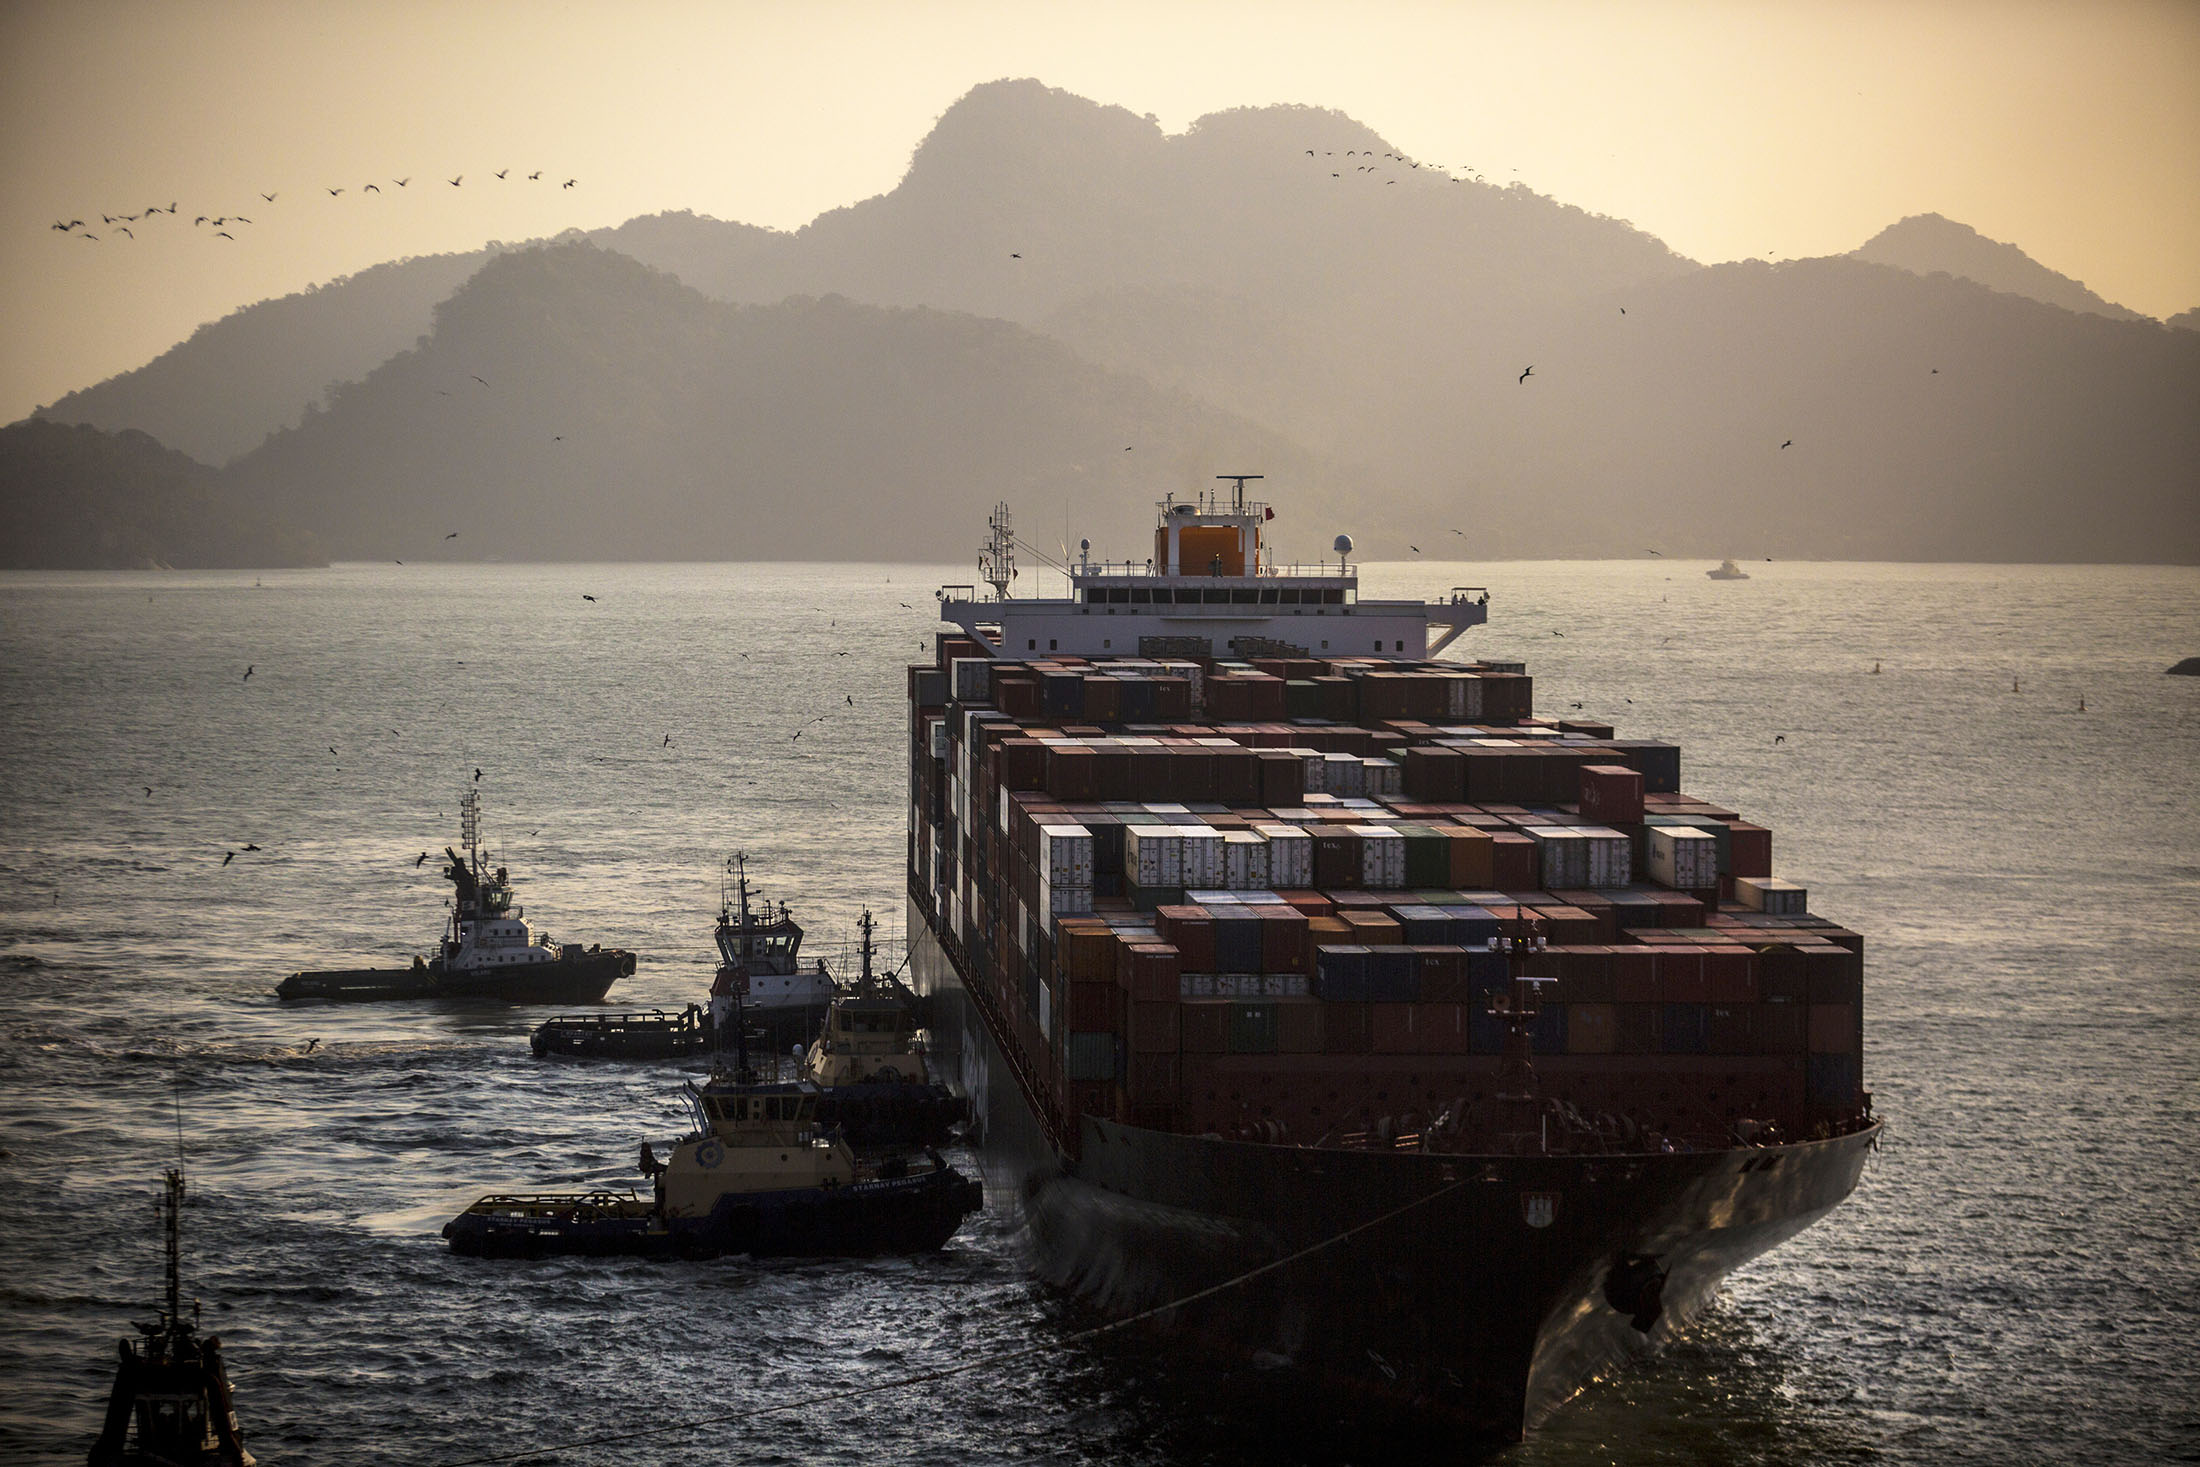 Tugboats assist a container ship at&nbsp;the Port of Itaguai in Rio de Janeiro, Brazil.